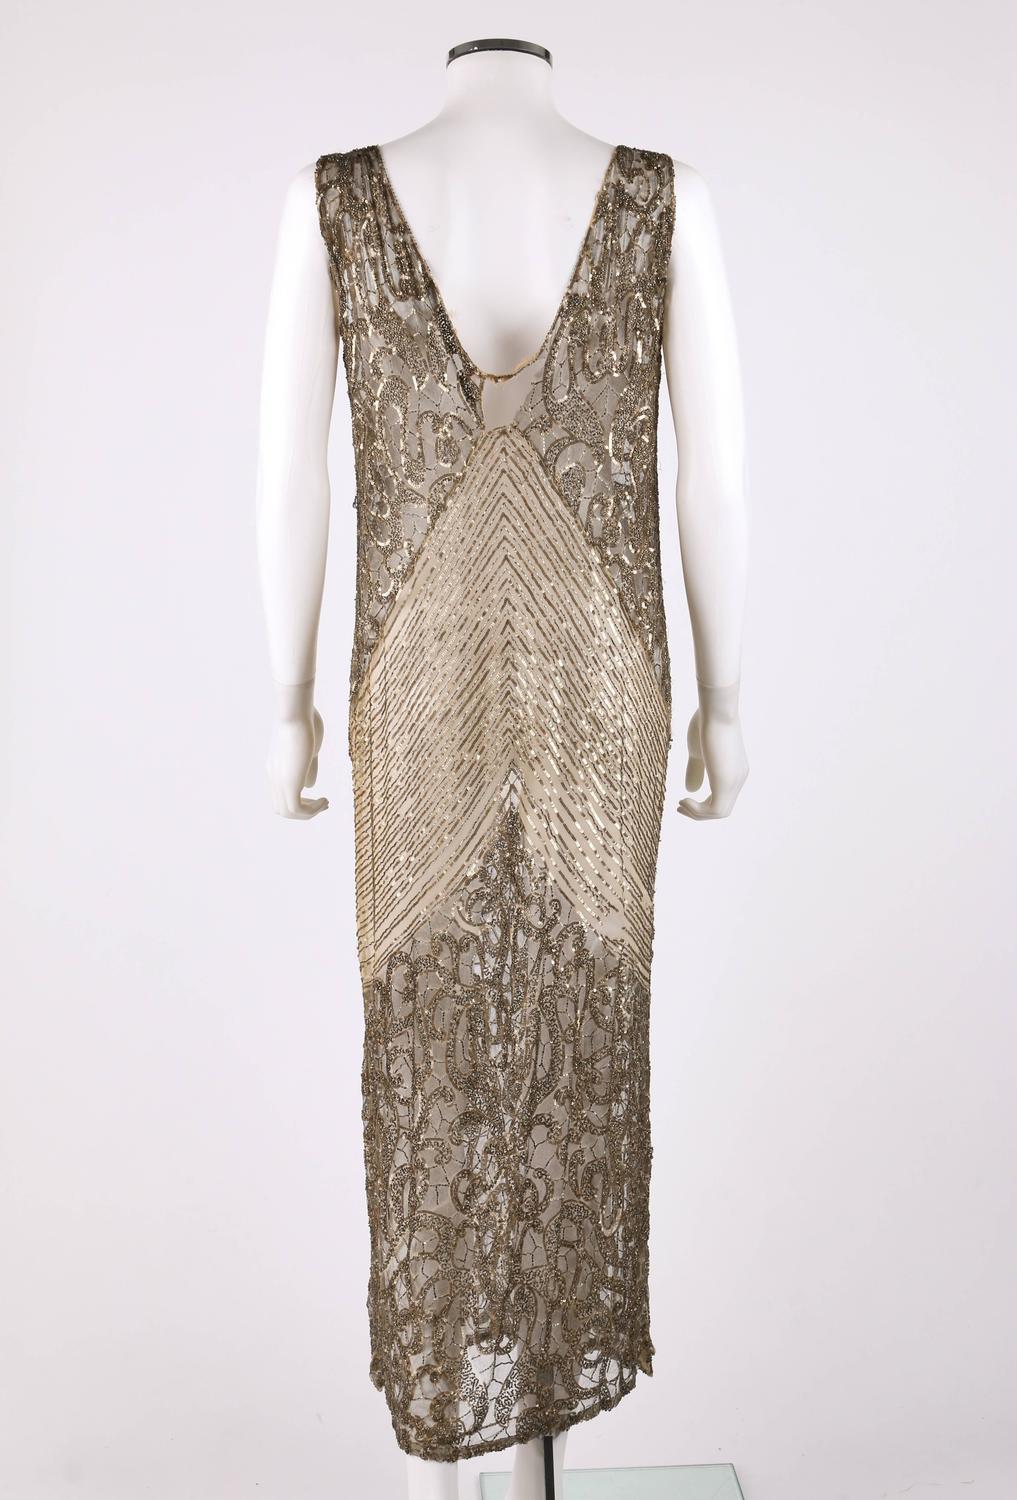 Couture c.1920's Gold Sequin Beaded Net Plunging Flapper Art Deco ...